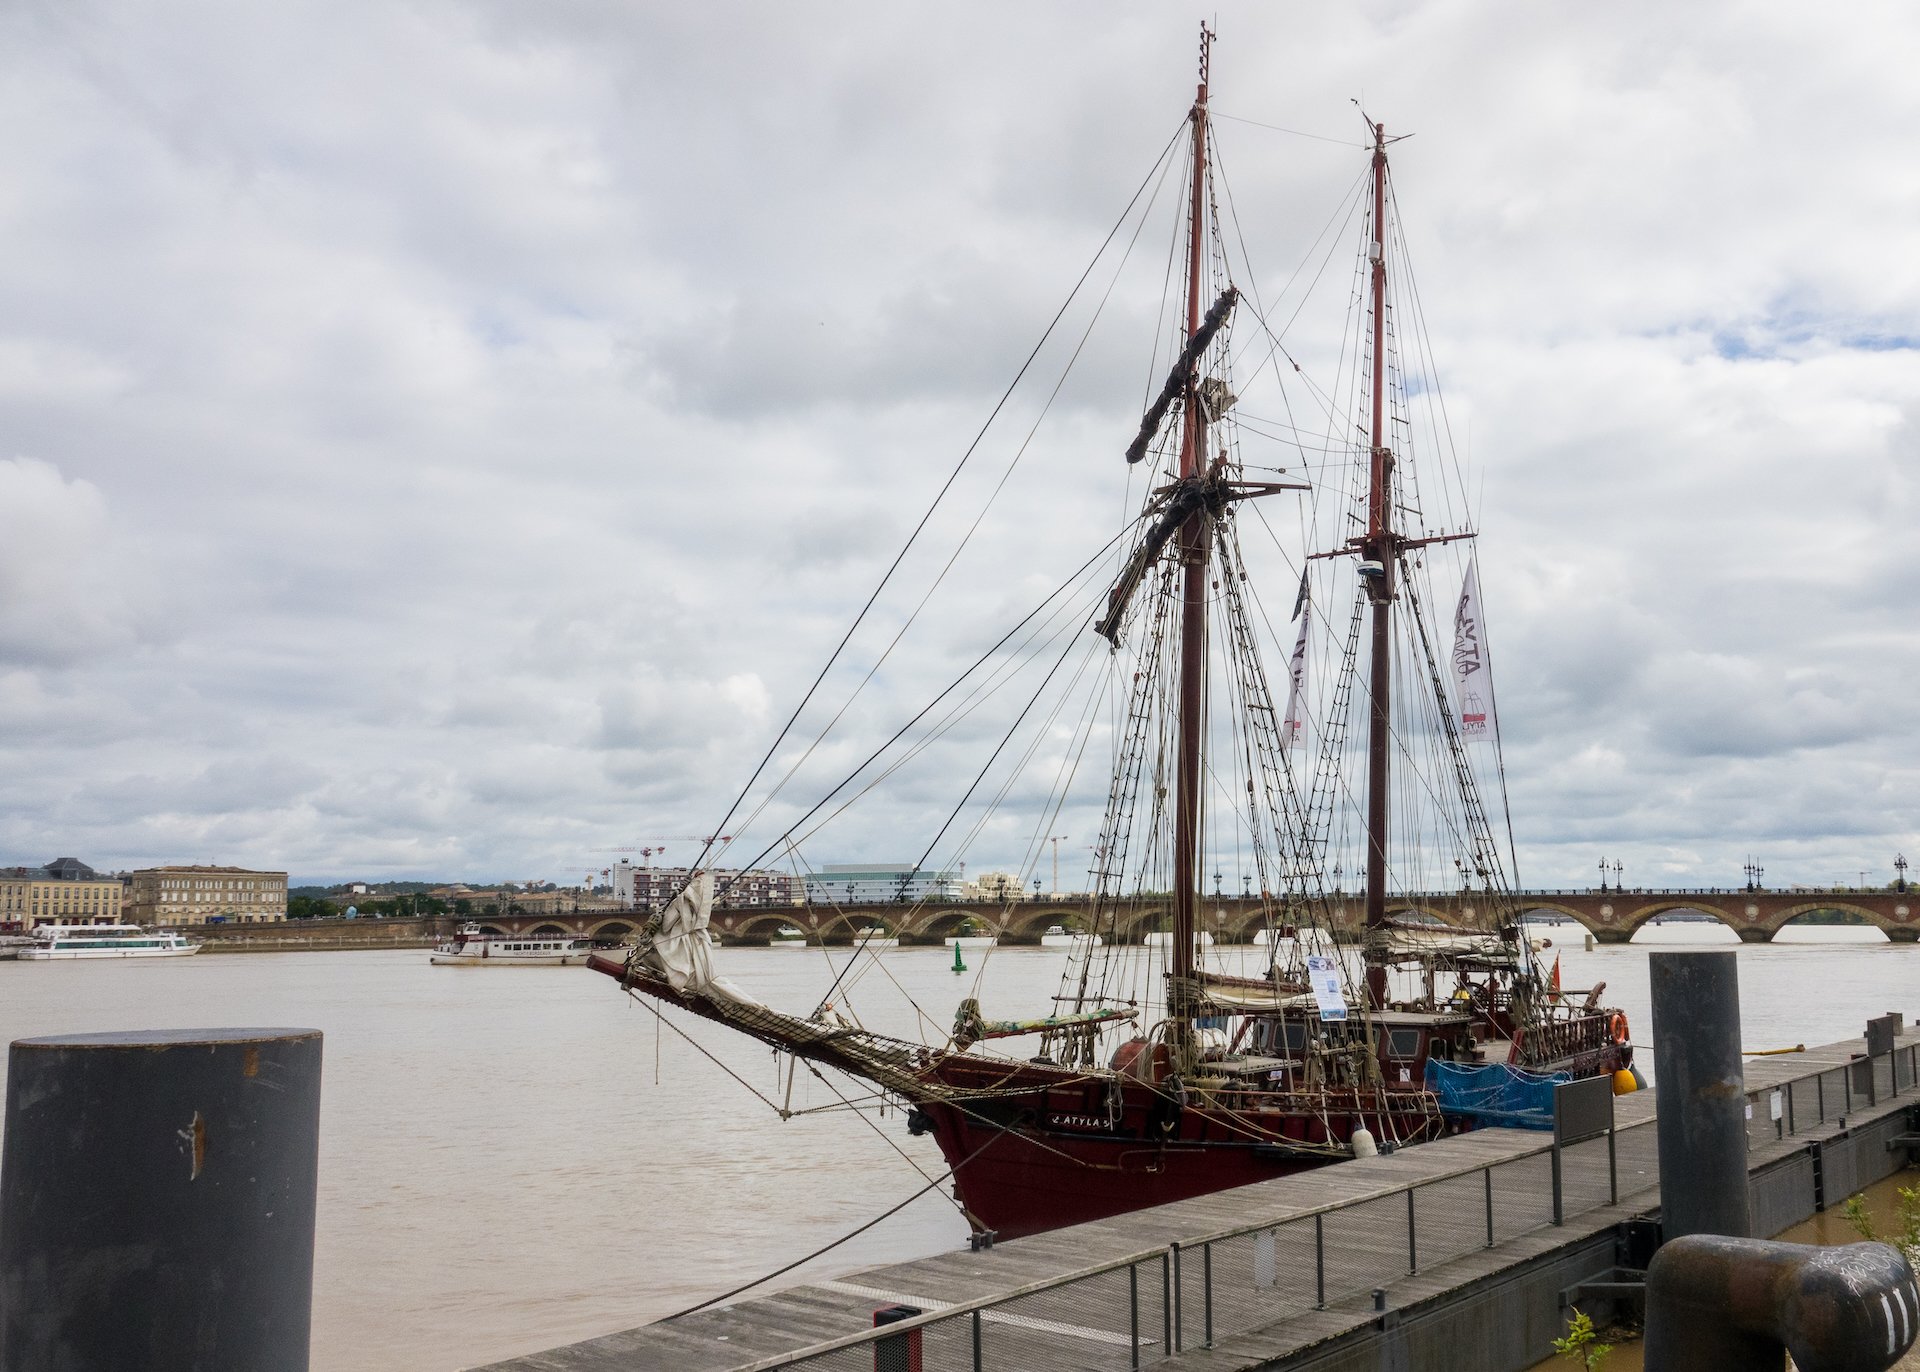  There was an interesting ship tied up along the riverbank. 